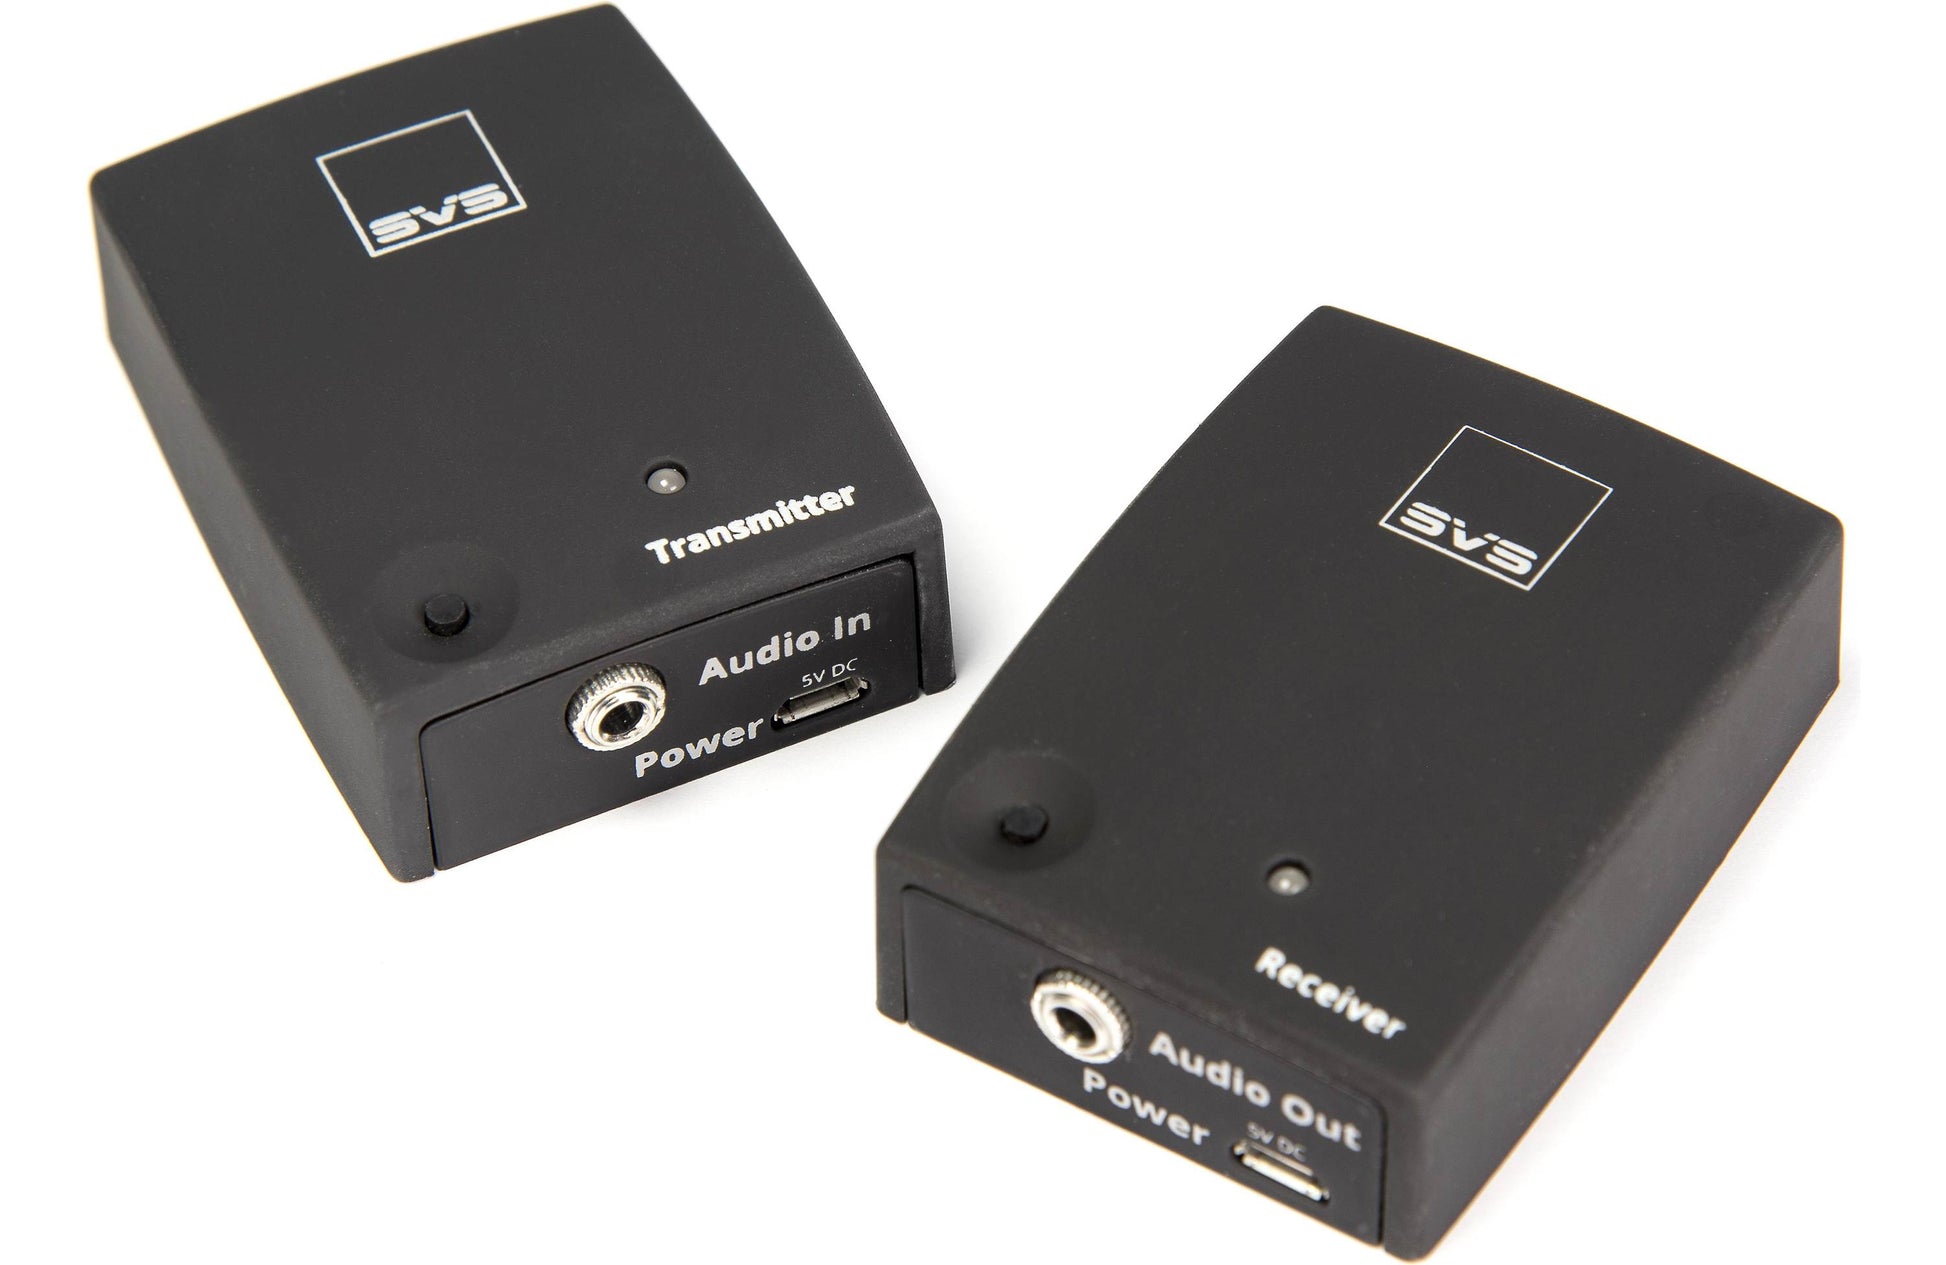 SVS SoundPath Wireless Audio Adapter for Powered Subwoofers